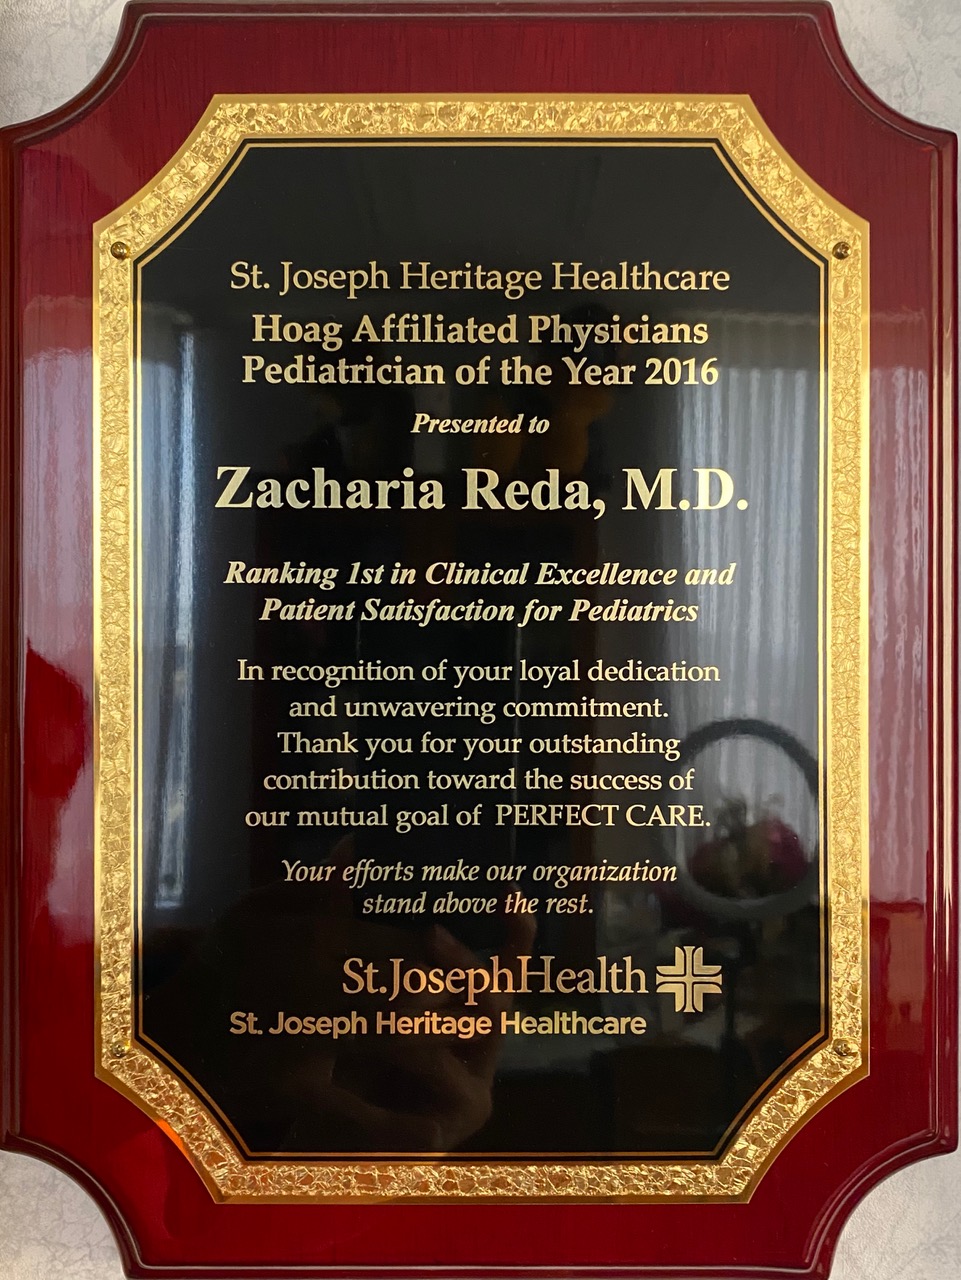 St Joseph Heritage Healthcare Hoag Affiliated Physicians Pediatrician of the Year 2016 Award